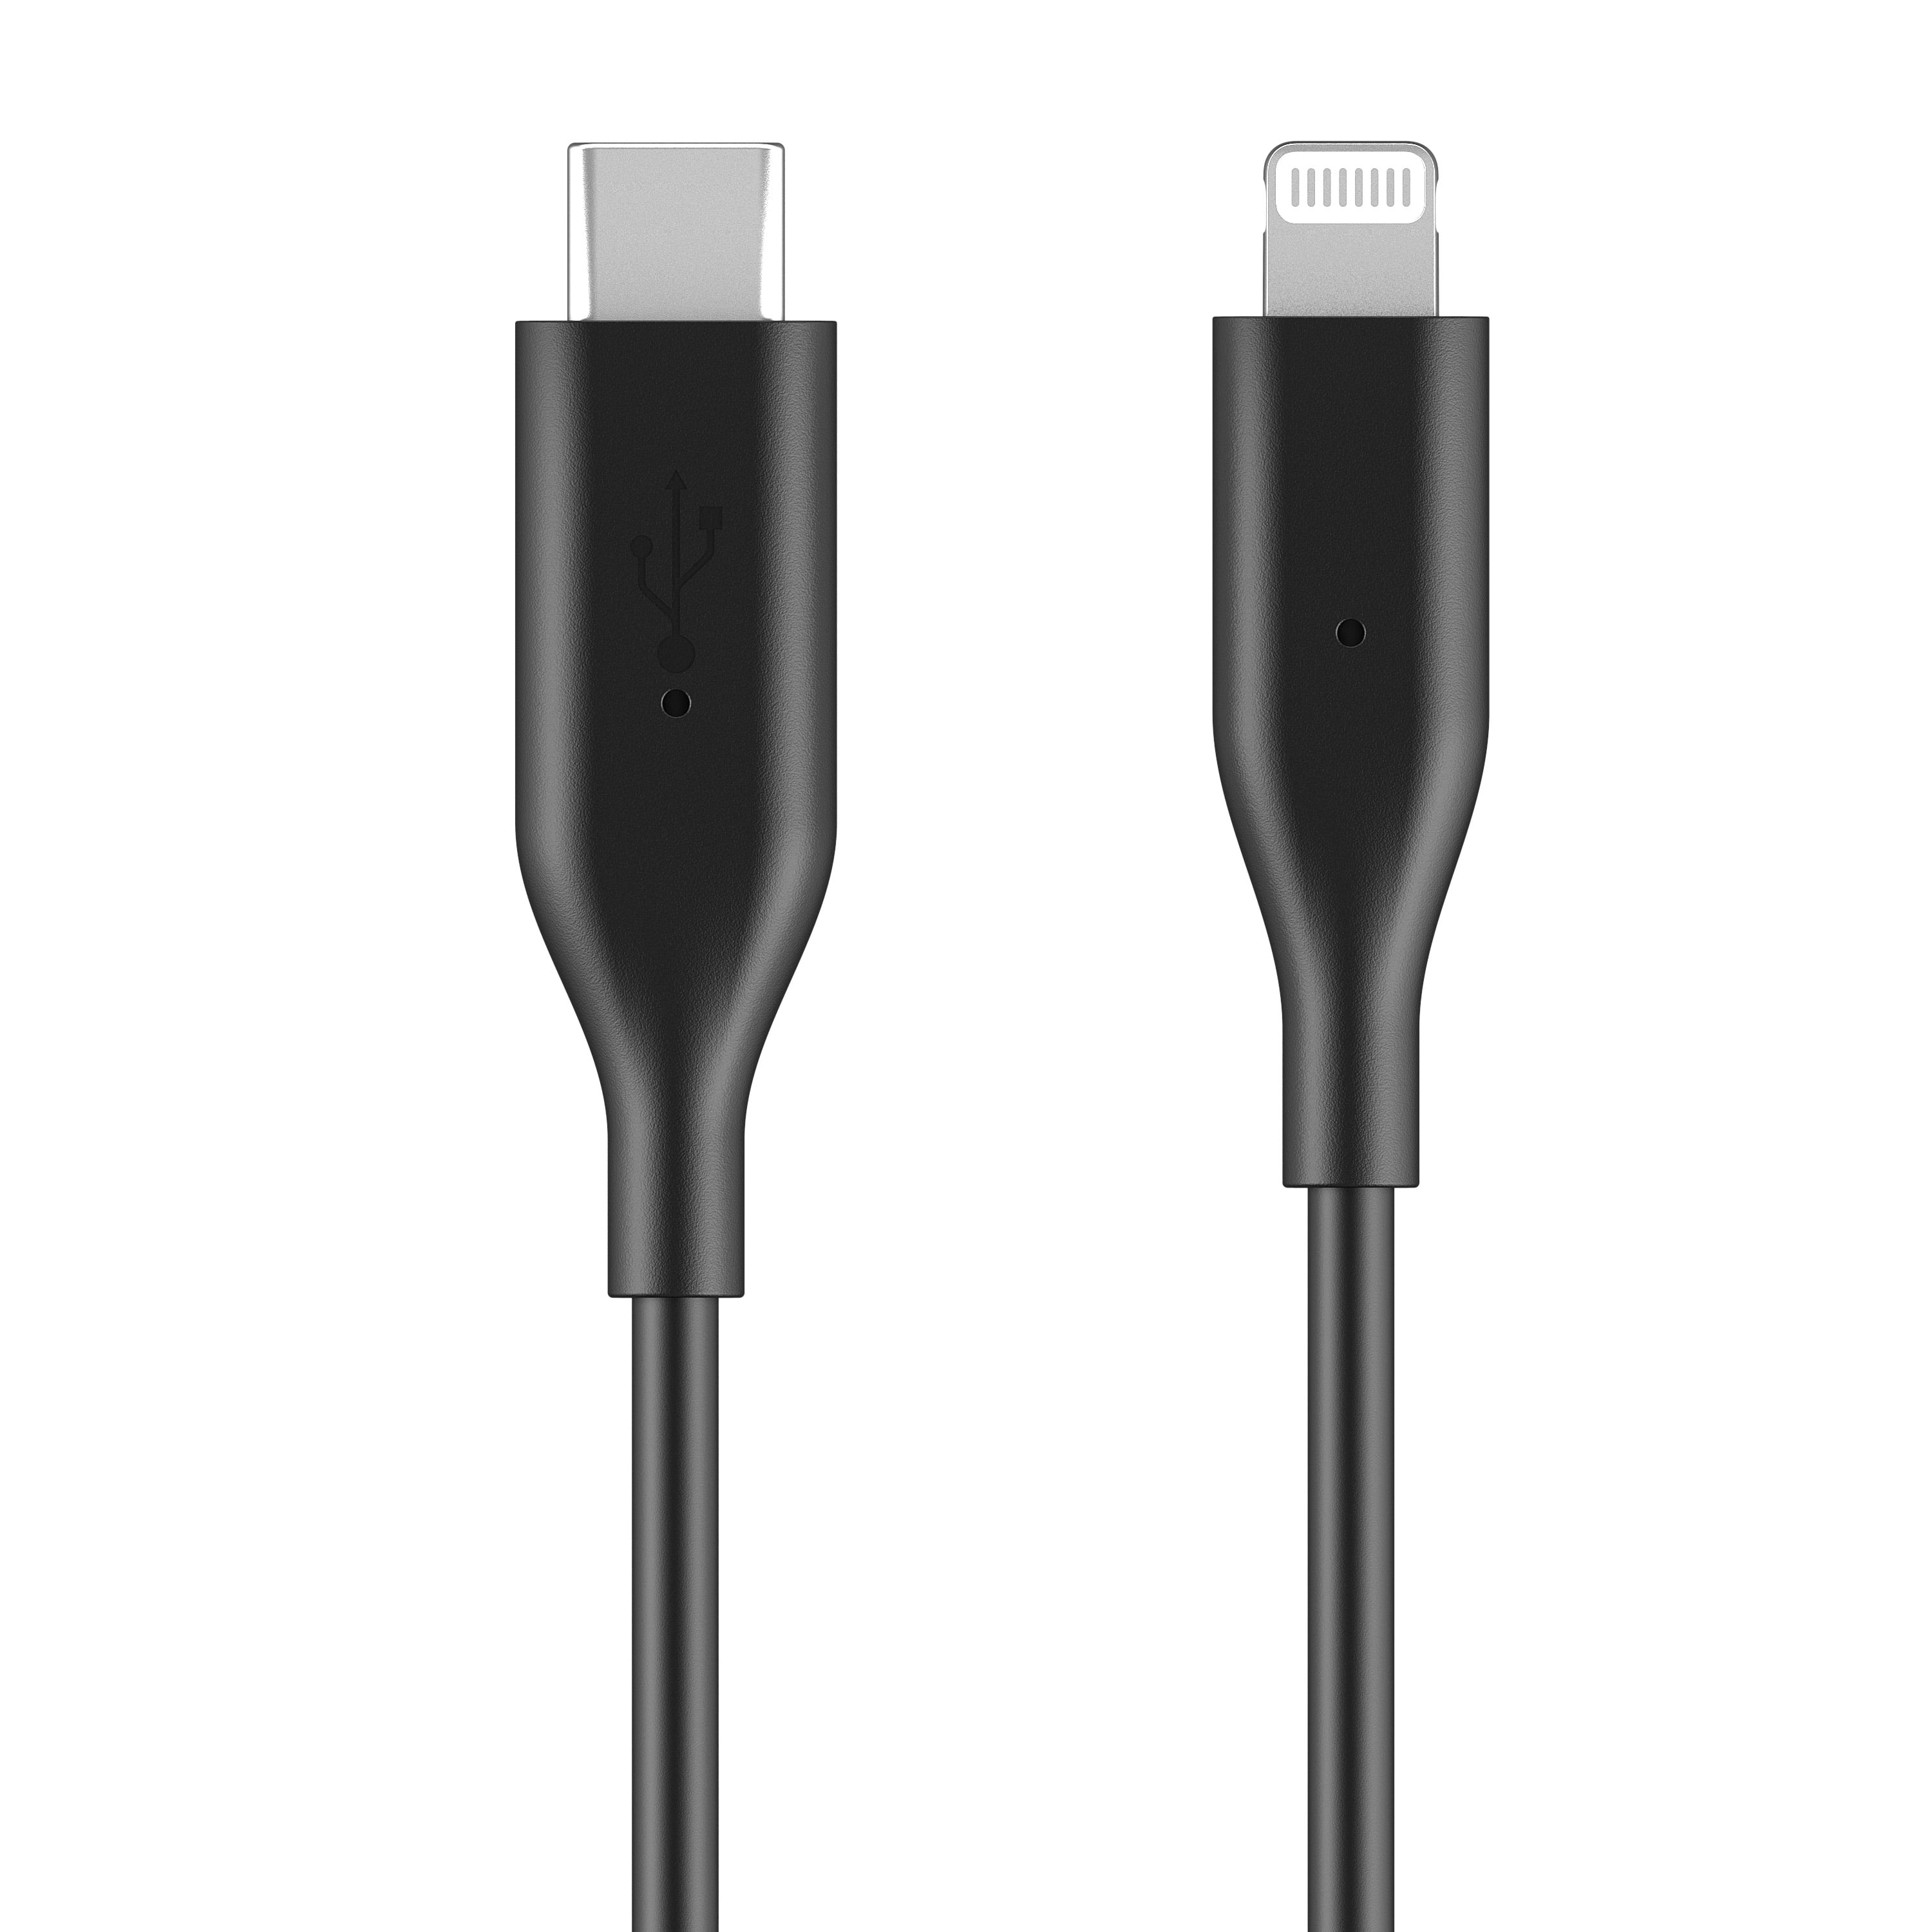 Auto Drive Lightning to USB C Data Sync and Charging Cable 3 feet, MFi Certified Compatible With iPhone 12/11/8/7/6/SE, Made by Luxshare